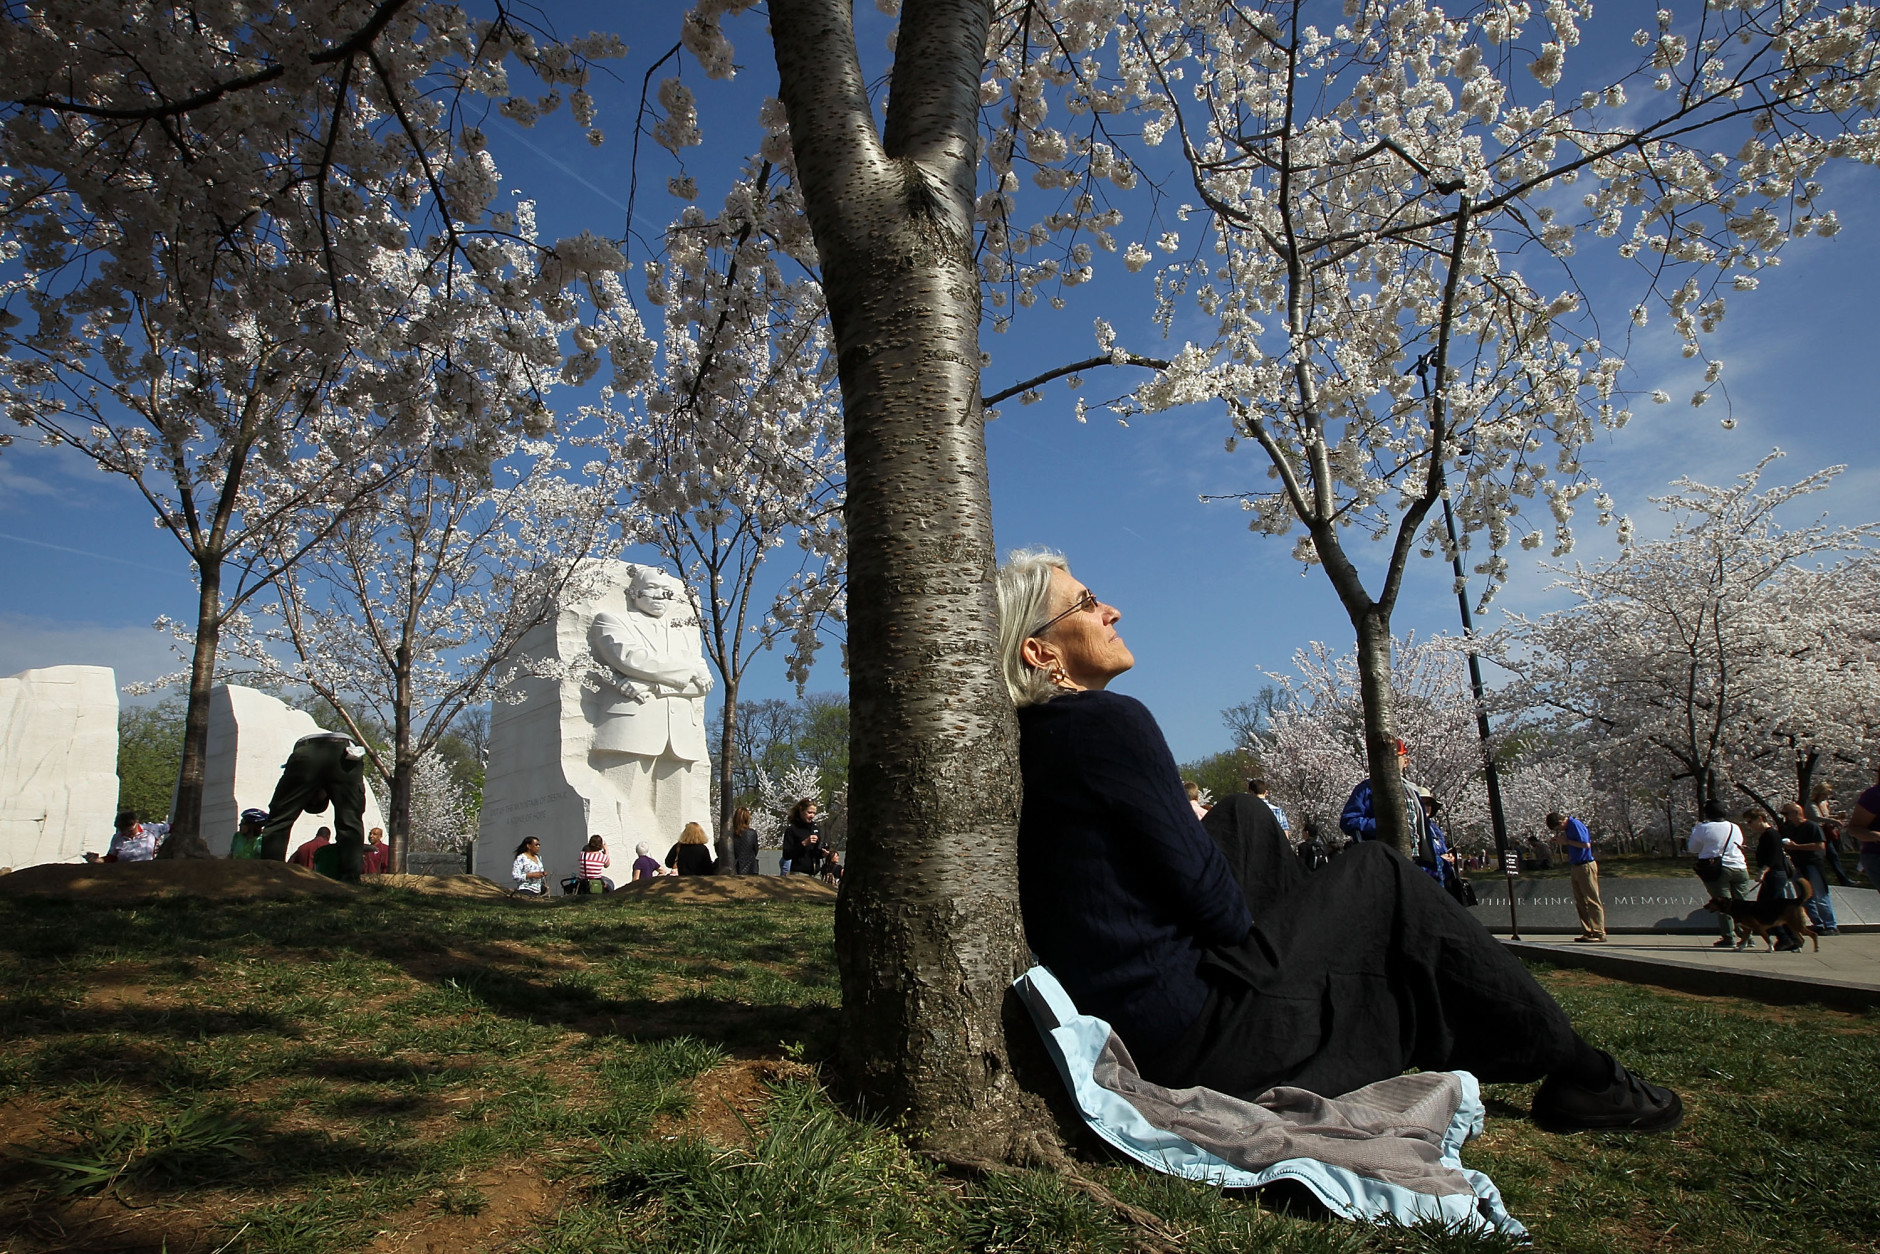 WASHINGTON, DC - MARCH 19:  Kitty Stoner of Annapolis, Maryland, sits against a tree in the warm weather as cherry trees blossom near the Tidal Basin March 19, 2012 in Washington, DC. This year marks the one hundredth anniversary of the cherry trees, which were originally a gift from Japan and werer planted on the National Mall.  (Photo by Alex Wong/Getty Images)